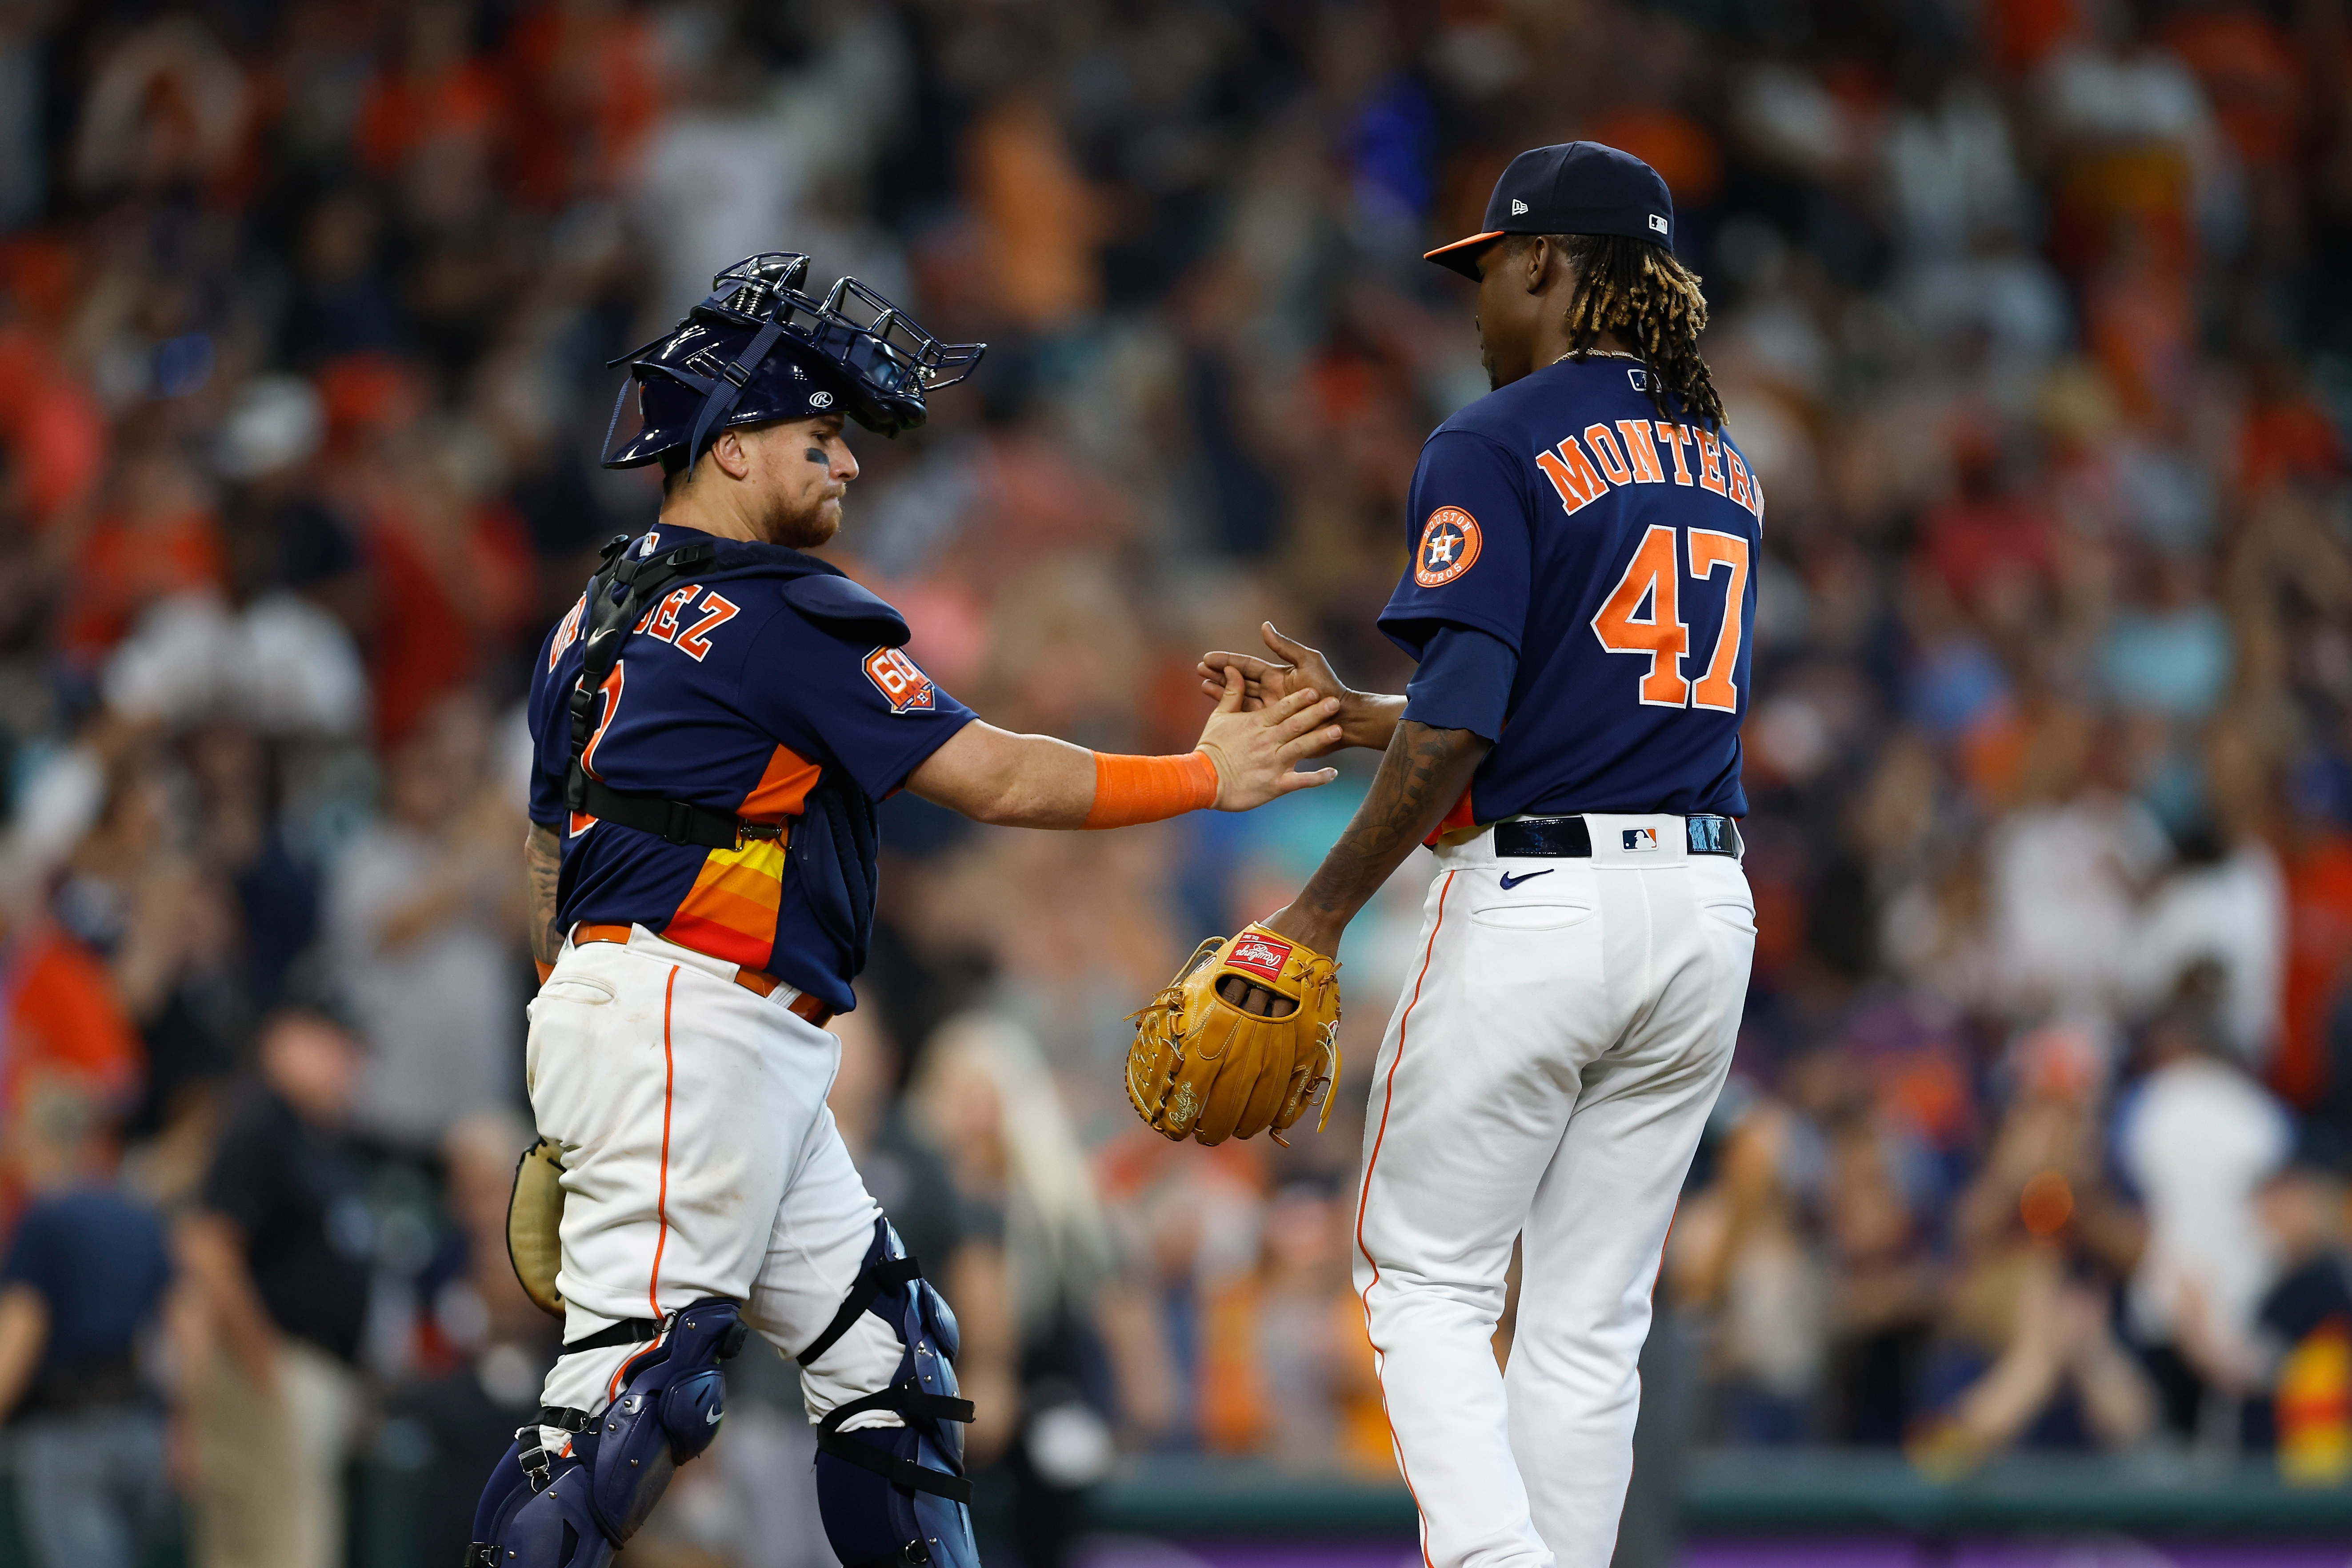 Krick: I'm Going With the Astros to Win the World Series